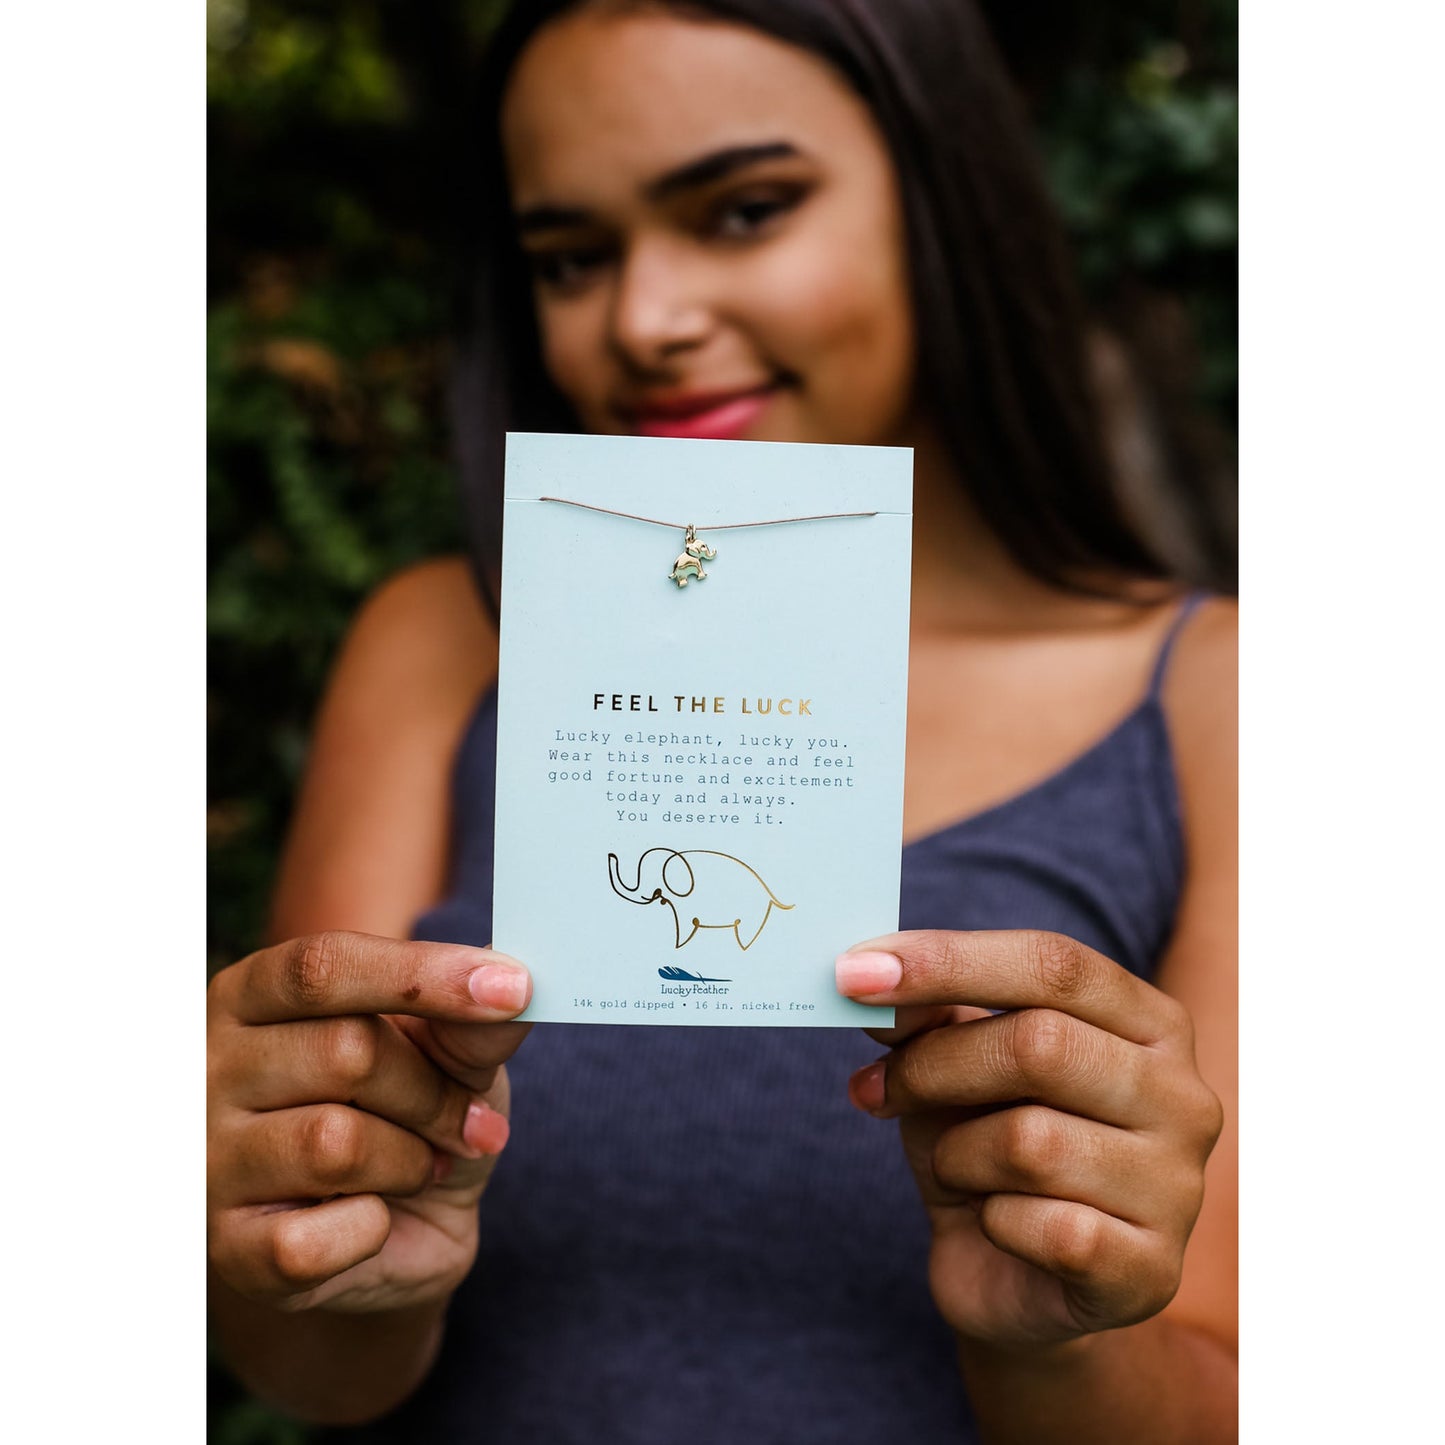 Feel the Luck - Gold Elephant Necklace